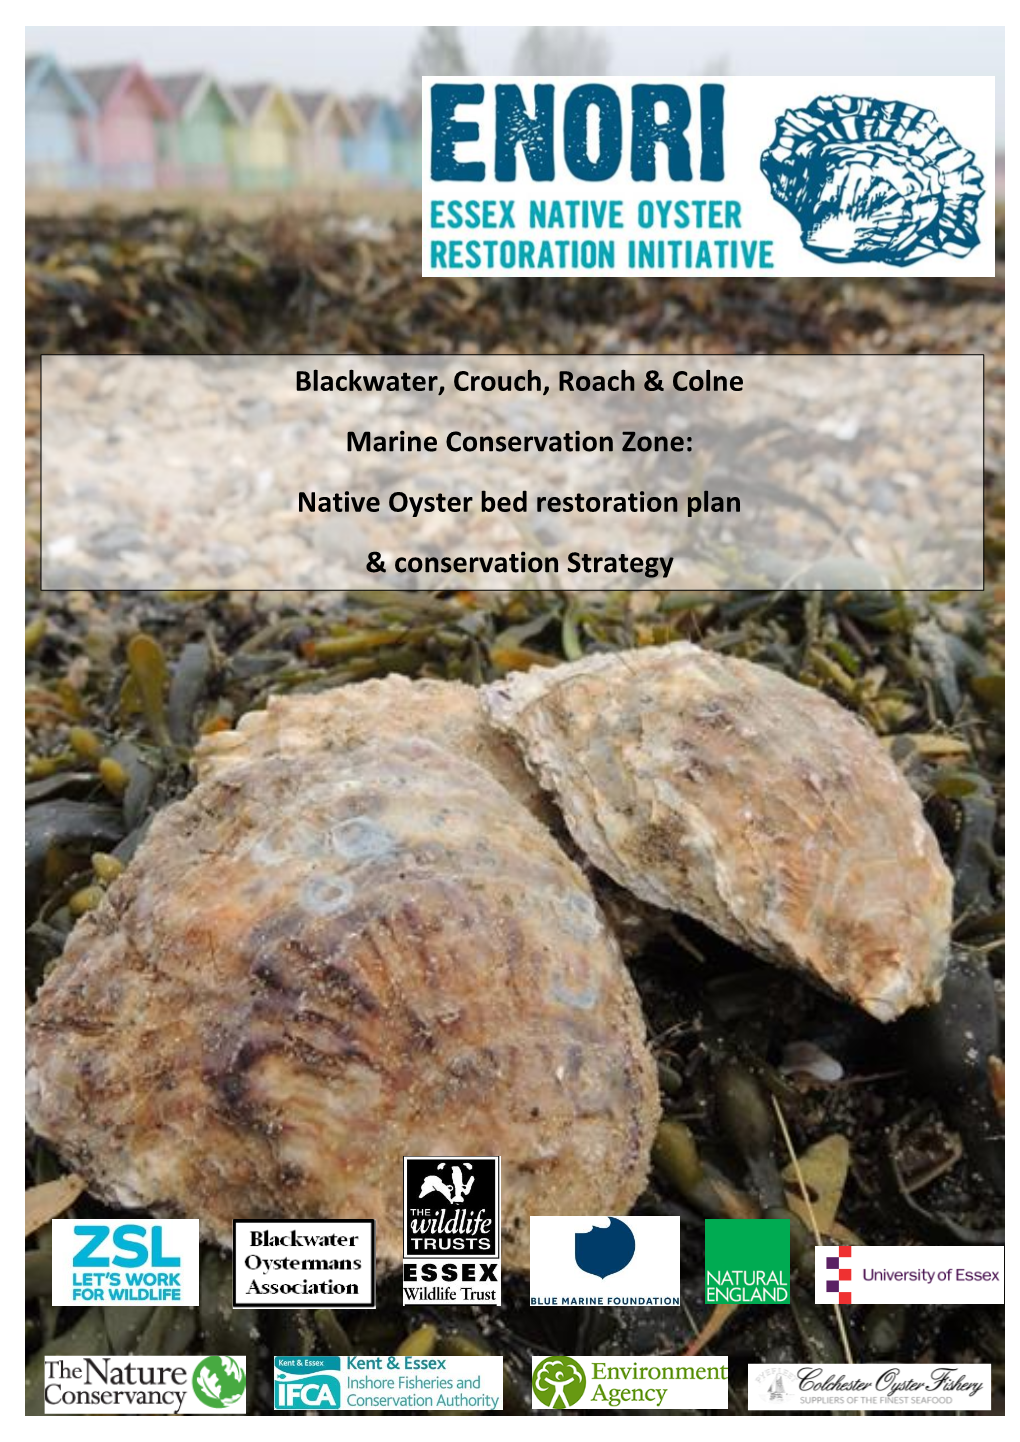 Blackwater, Crouch, Roach & Colne Marine Conservation Zone: Native Oyster Bed Restoration Plan & Conservation Strategy